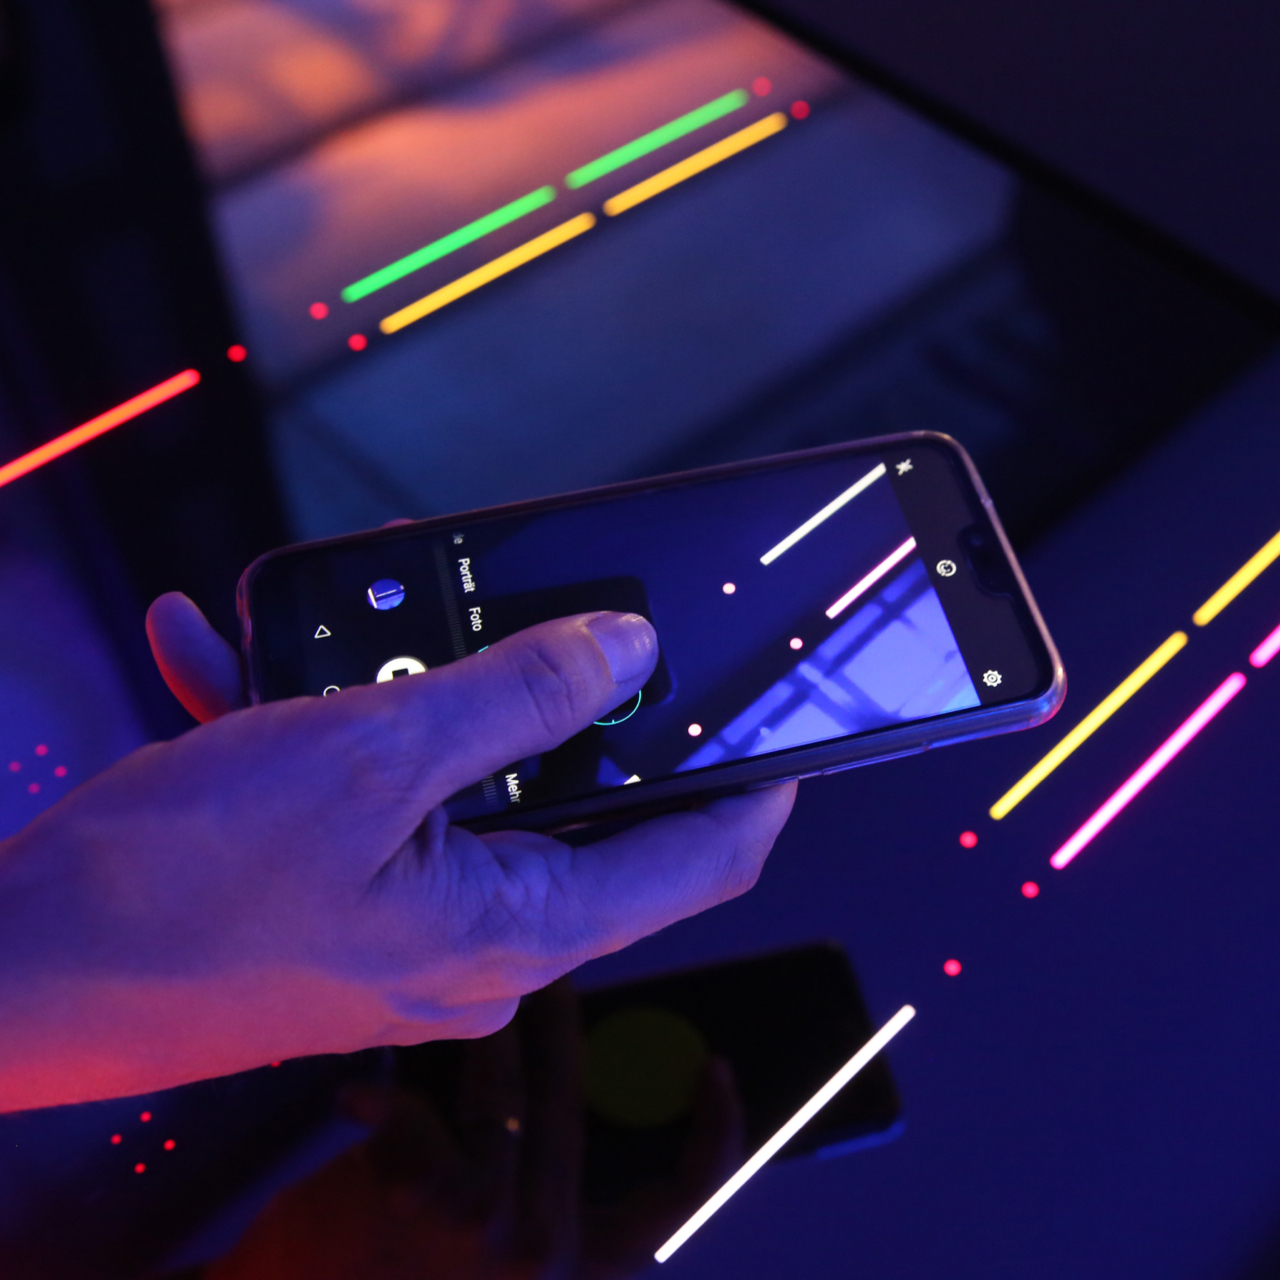 A hand with a mobile phone in photo-mode over a glass-ceramic with colored illuminated light elements